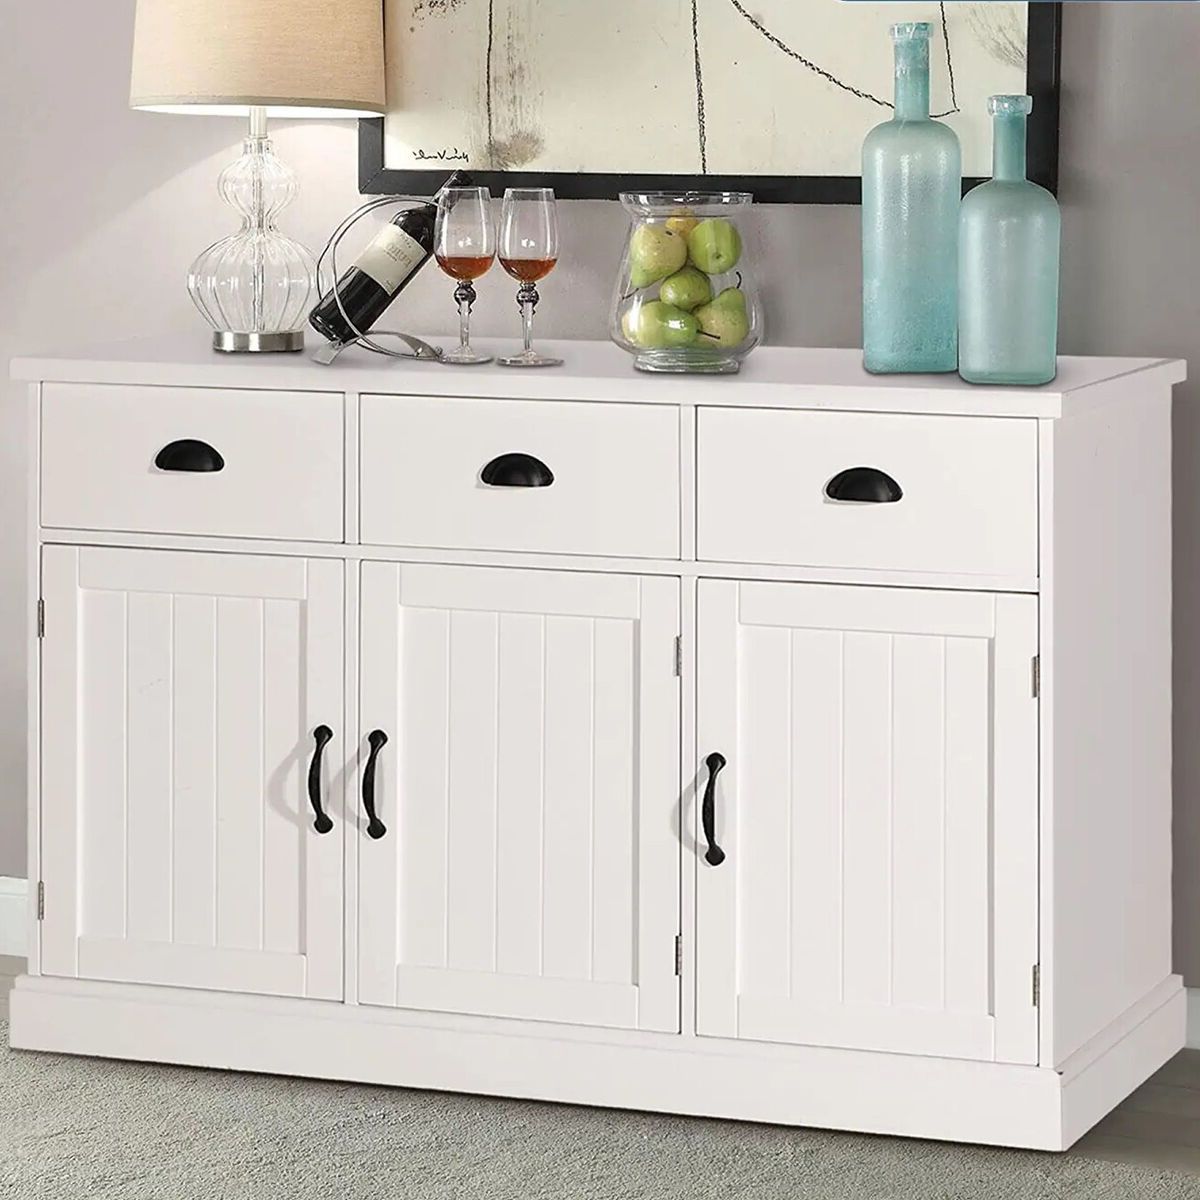 Sideboard Buffet Storage Cabinet W/3 Door 3 Drawers Farmhouse Coffee Bar  Cabinet | Ebay Throughout Sideboard Storage Cabinet With 3 Drawers & 3 Doors (Gallery 7 of 20)